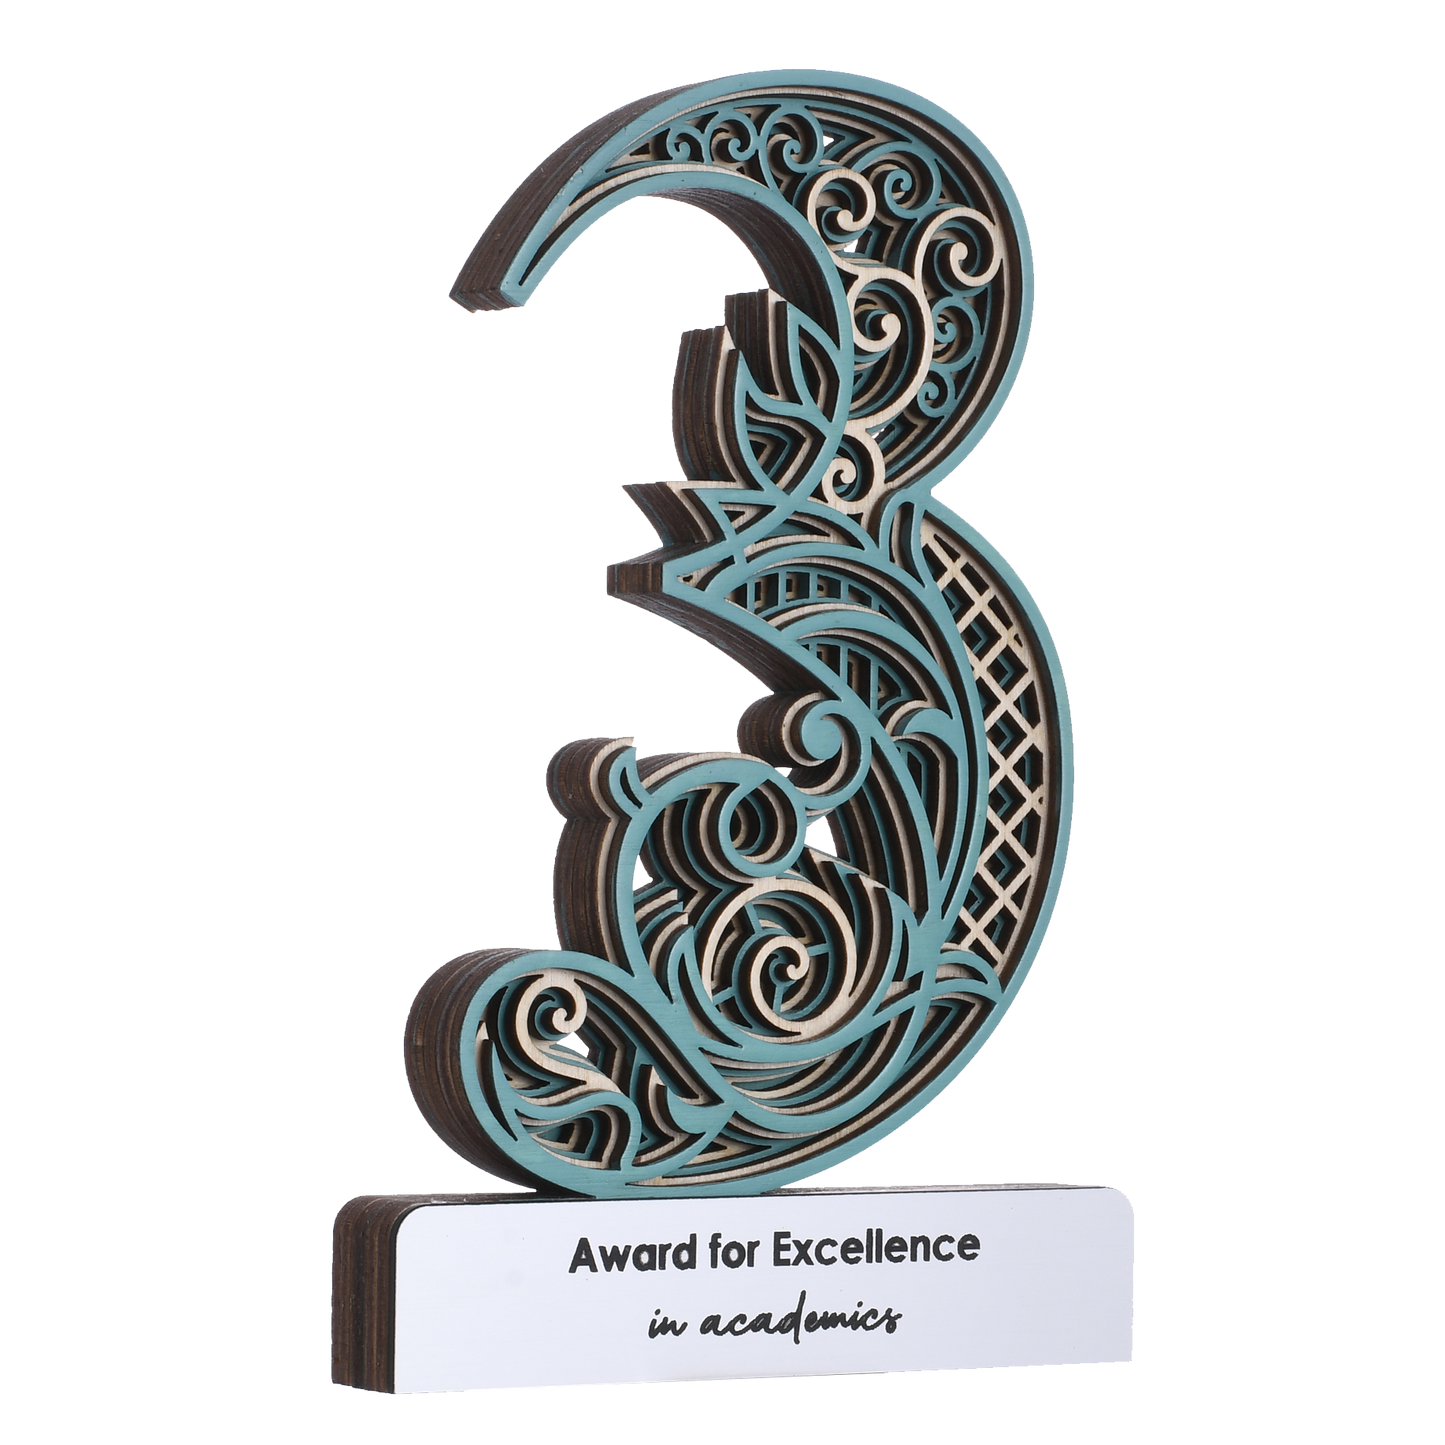 Floral Fantasy: The Artistic Wooden Trophy Embodying Achievement and Elegance